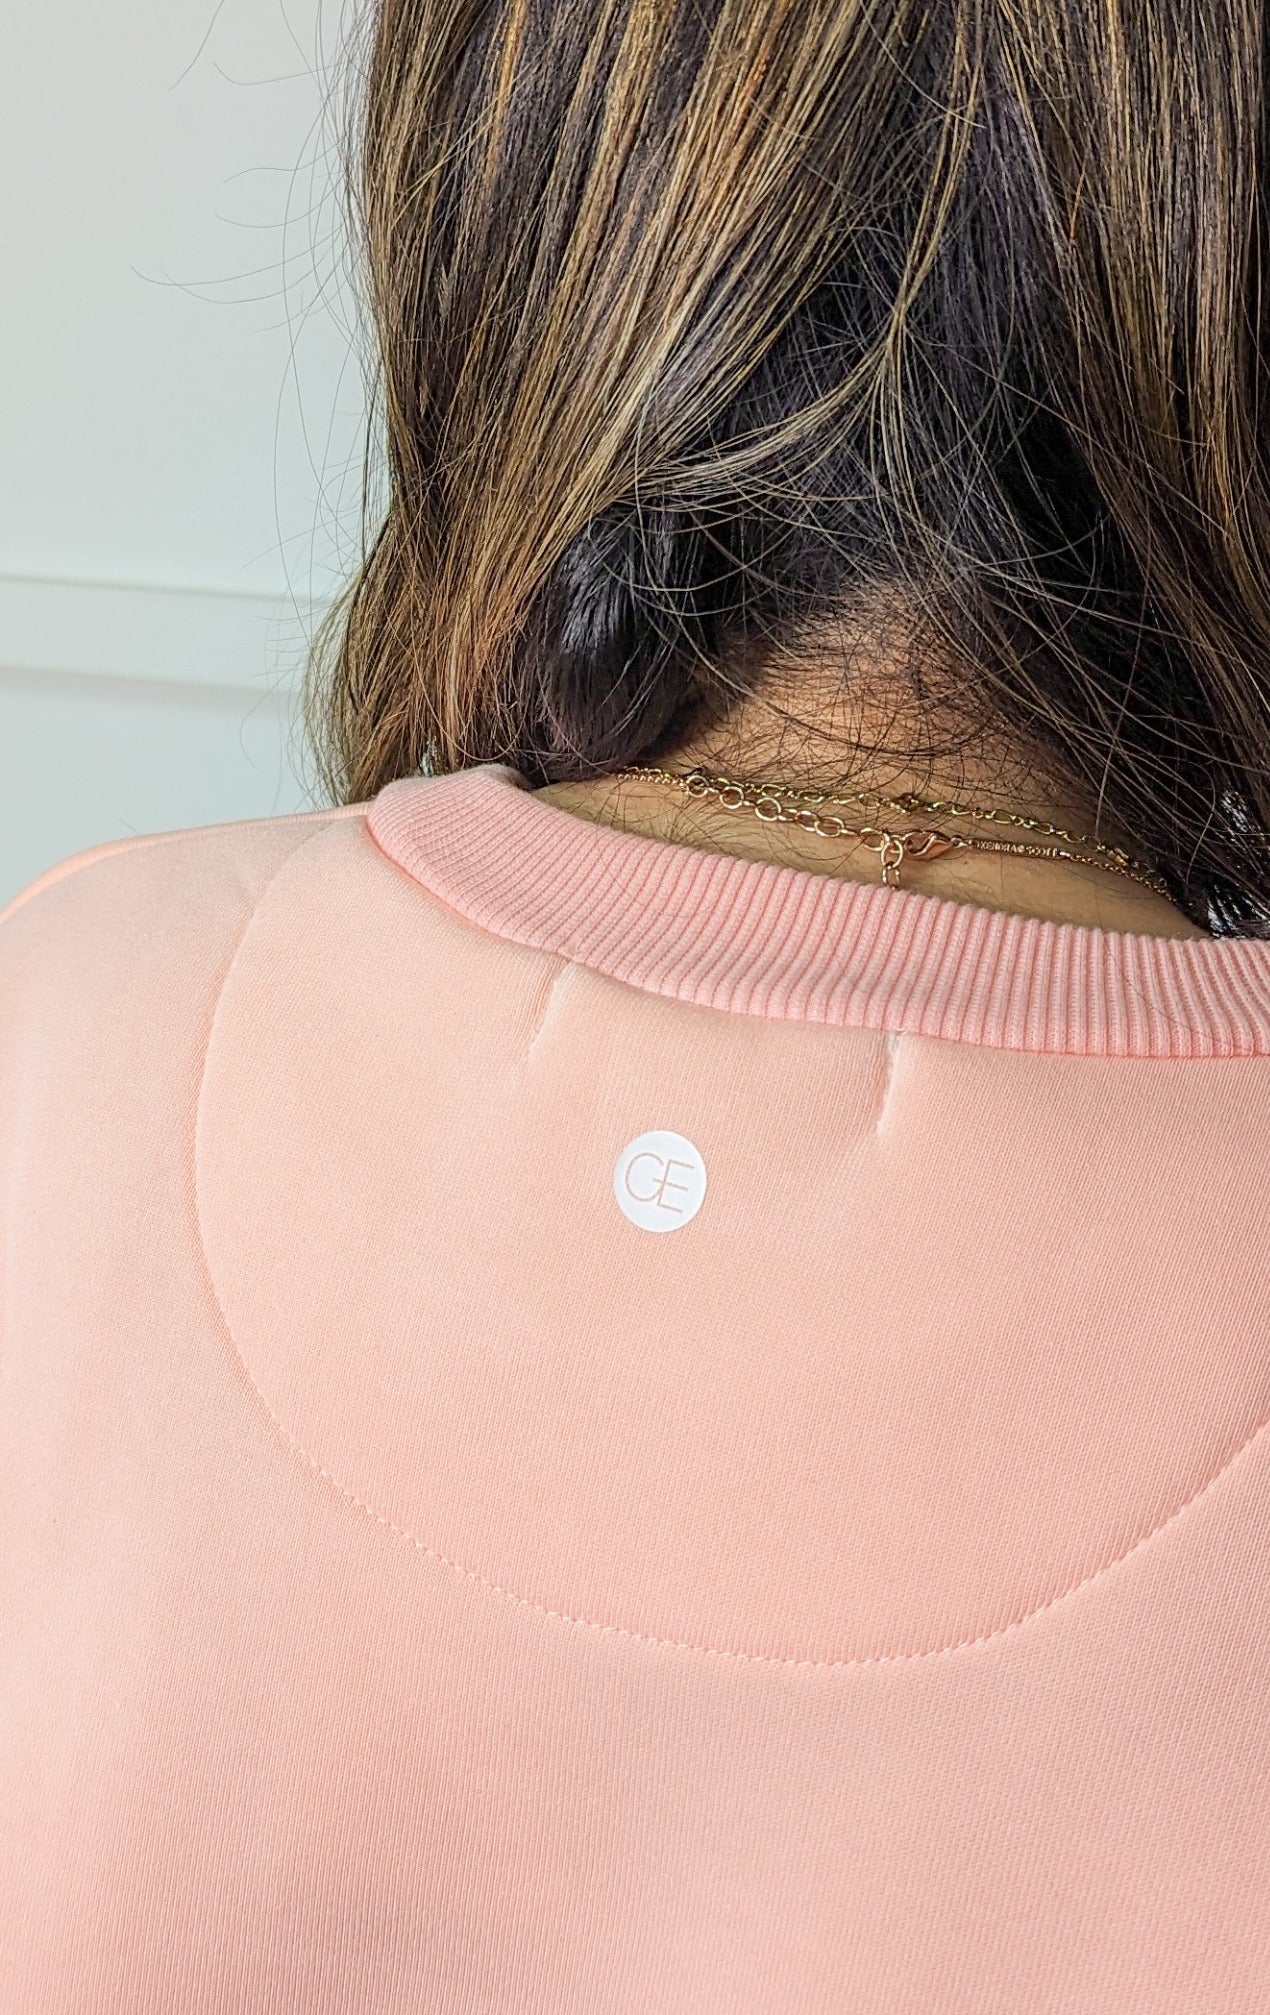 Valentine Hearts Pink French Terry Sweatshirt With Ribbed Knit